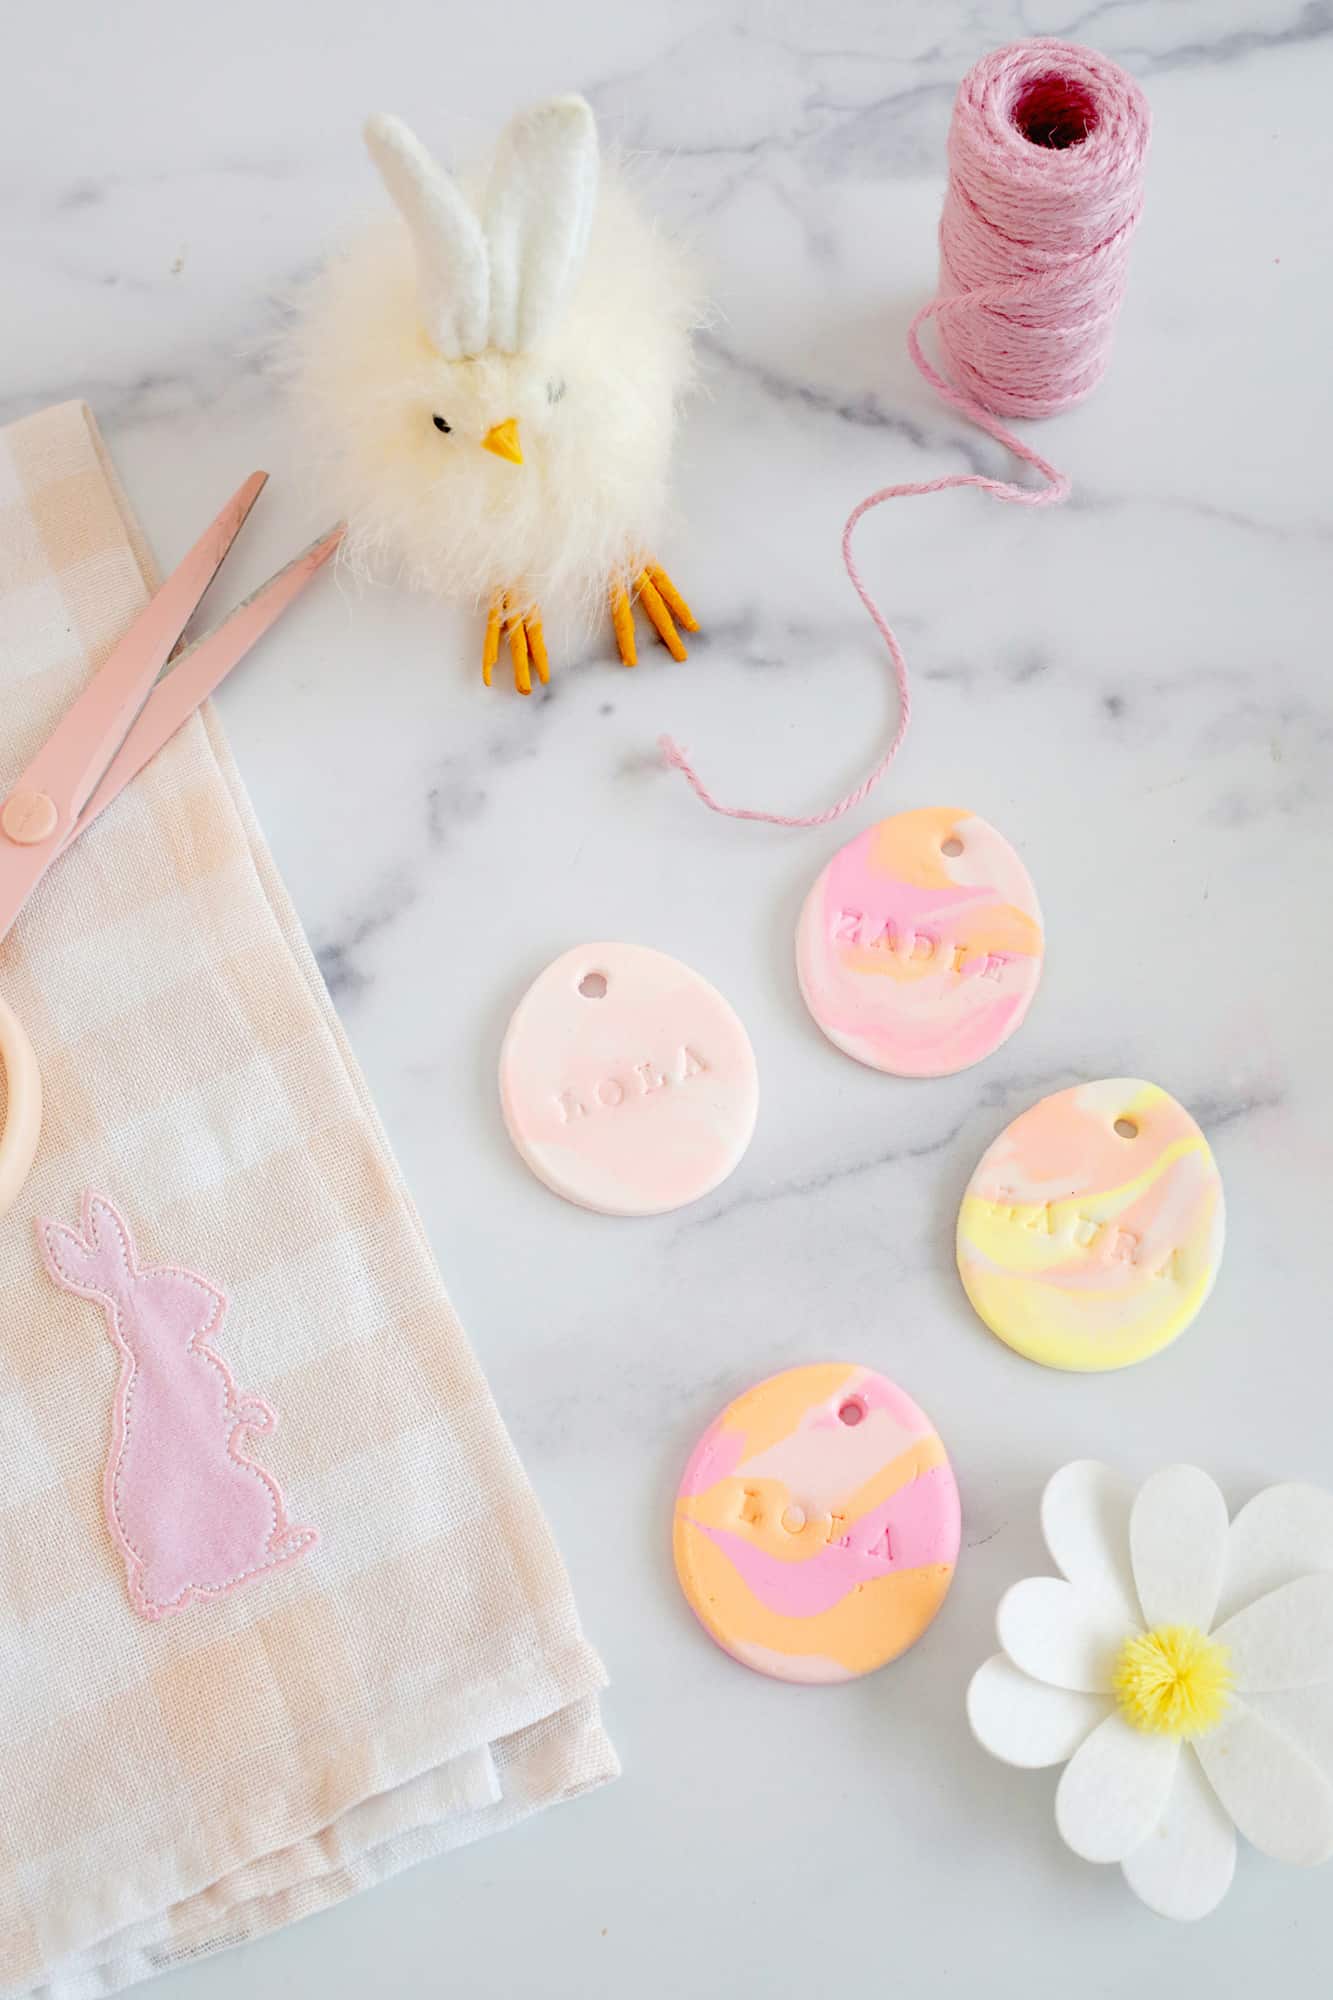 air dry clay name tags shaped like marbled eggs